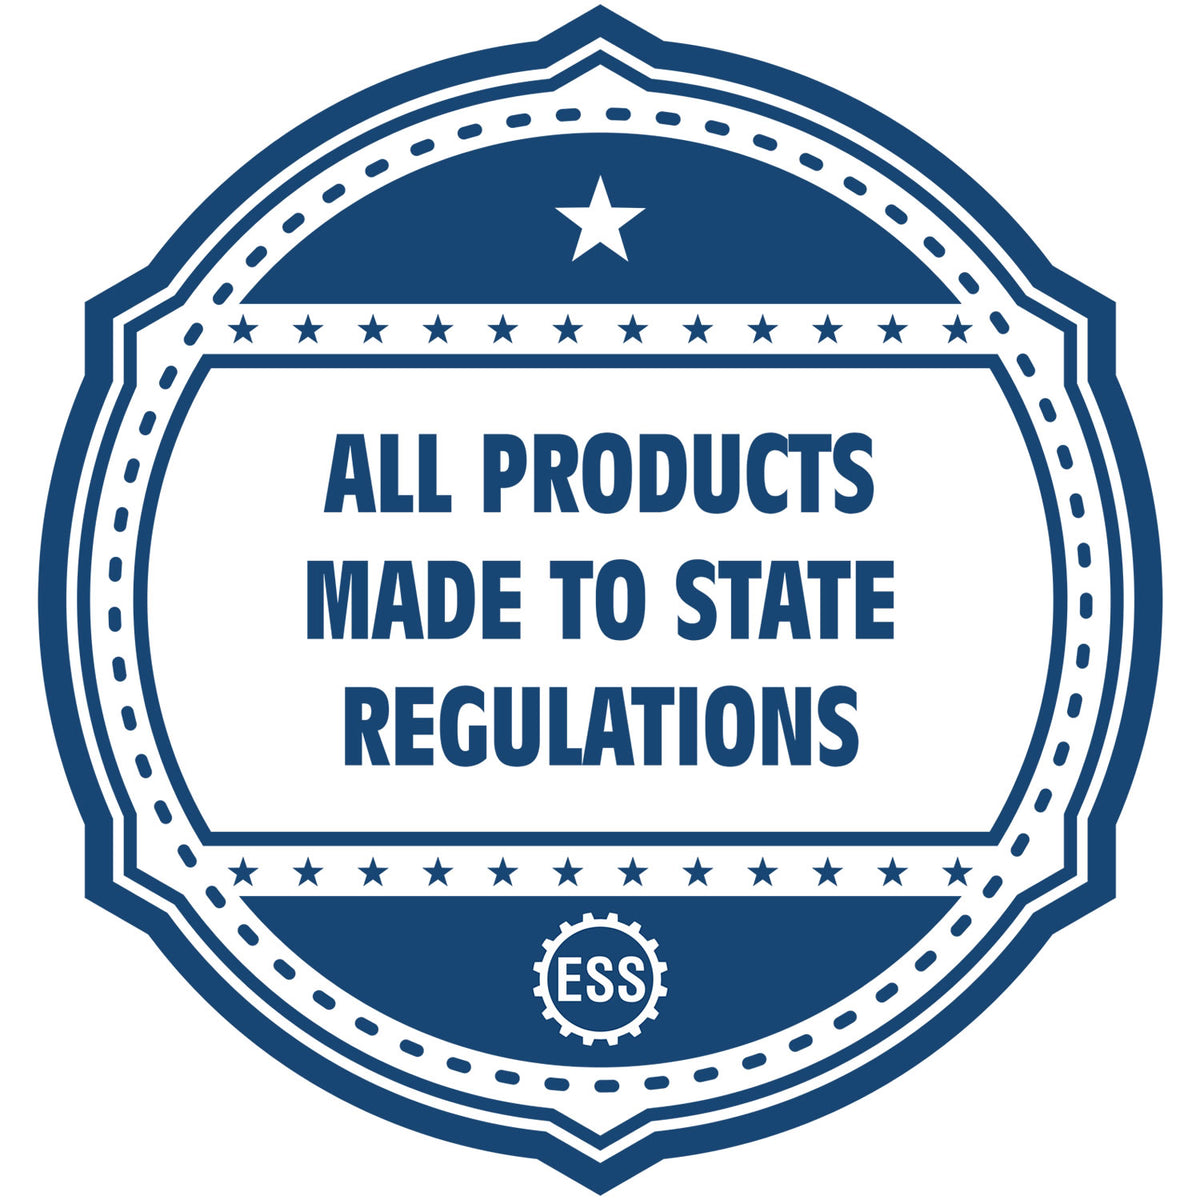 An icon or badge element for the Slim Pre-Inked Wyoming Land Surveyor Seal Stamp showing that this product is made in compliance with state regulations.